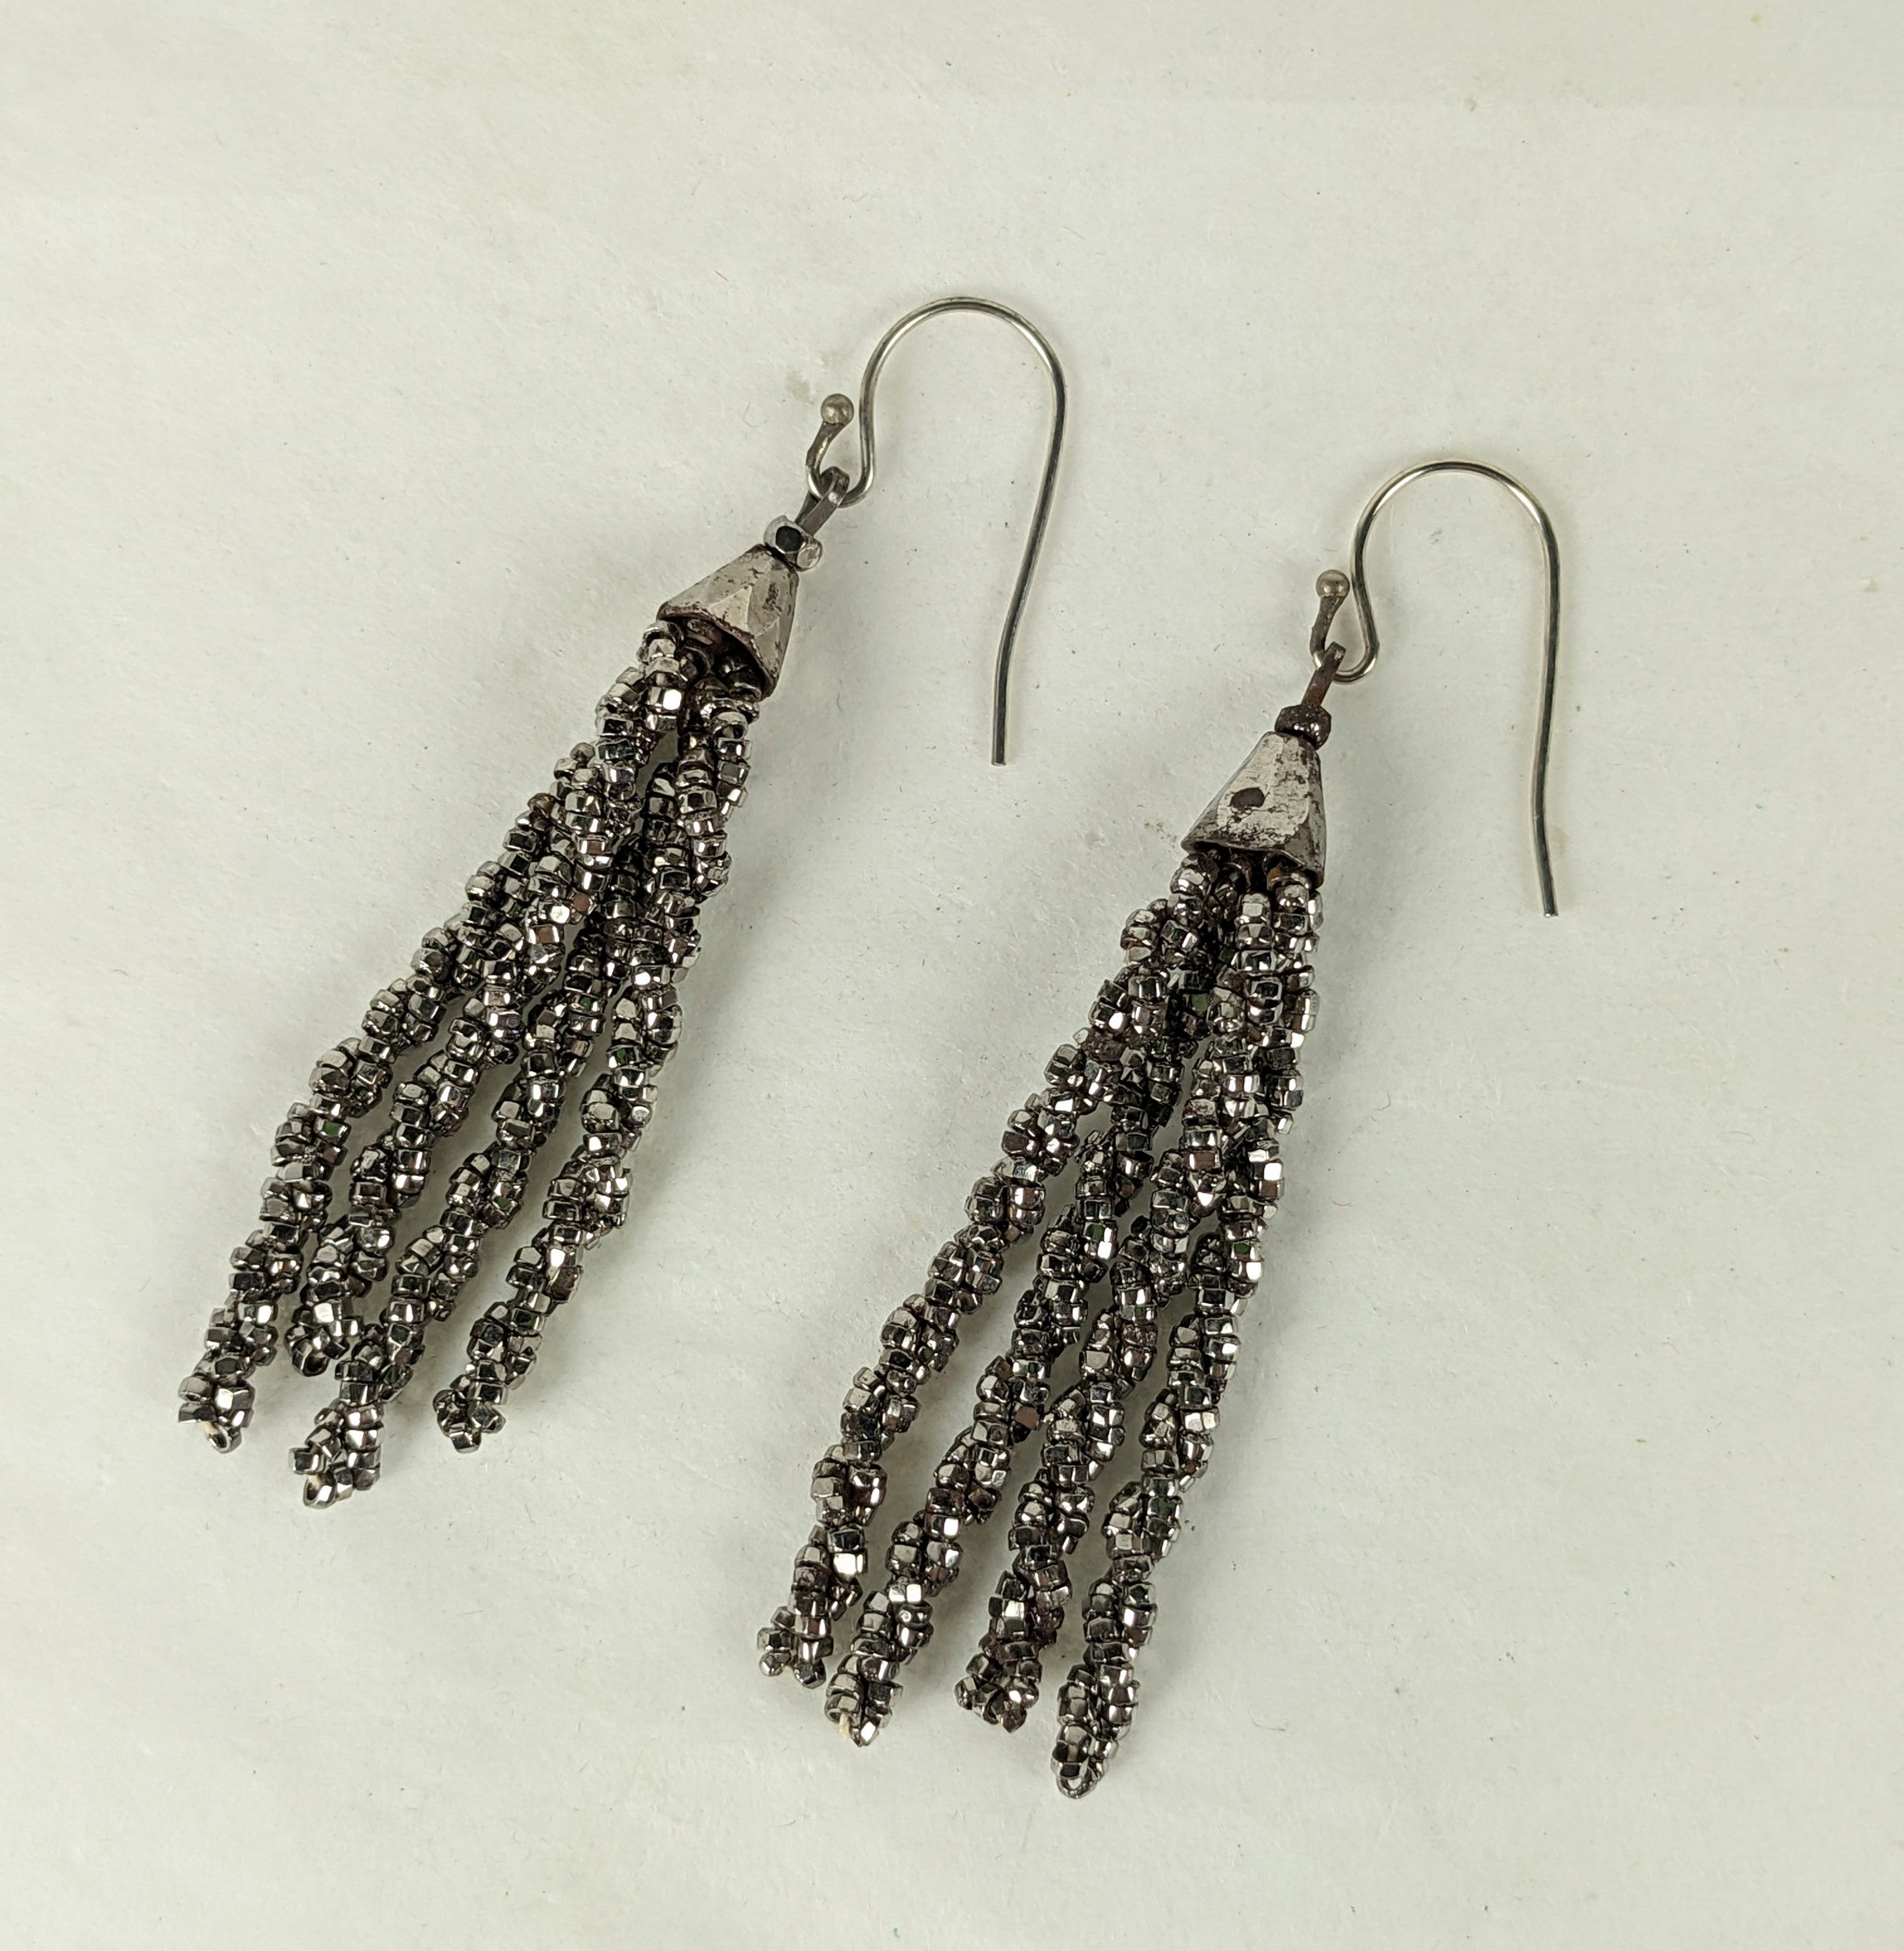 Victorian Cut Steel Tassel Earrings from the 19th Century. Tiny cut steel beads are strung into twists under a cut steel faceted cap. Ear wires later, 19th Century France.
Tassel 2